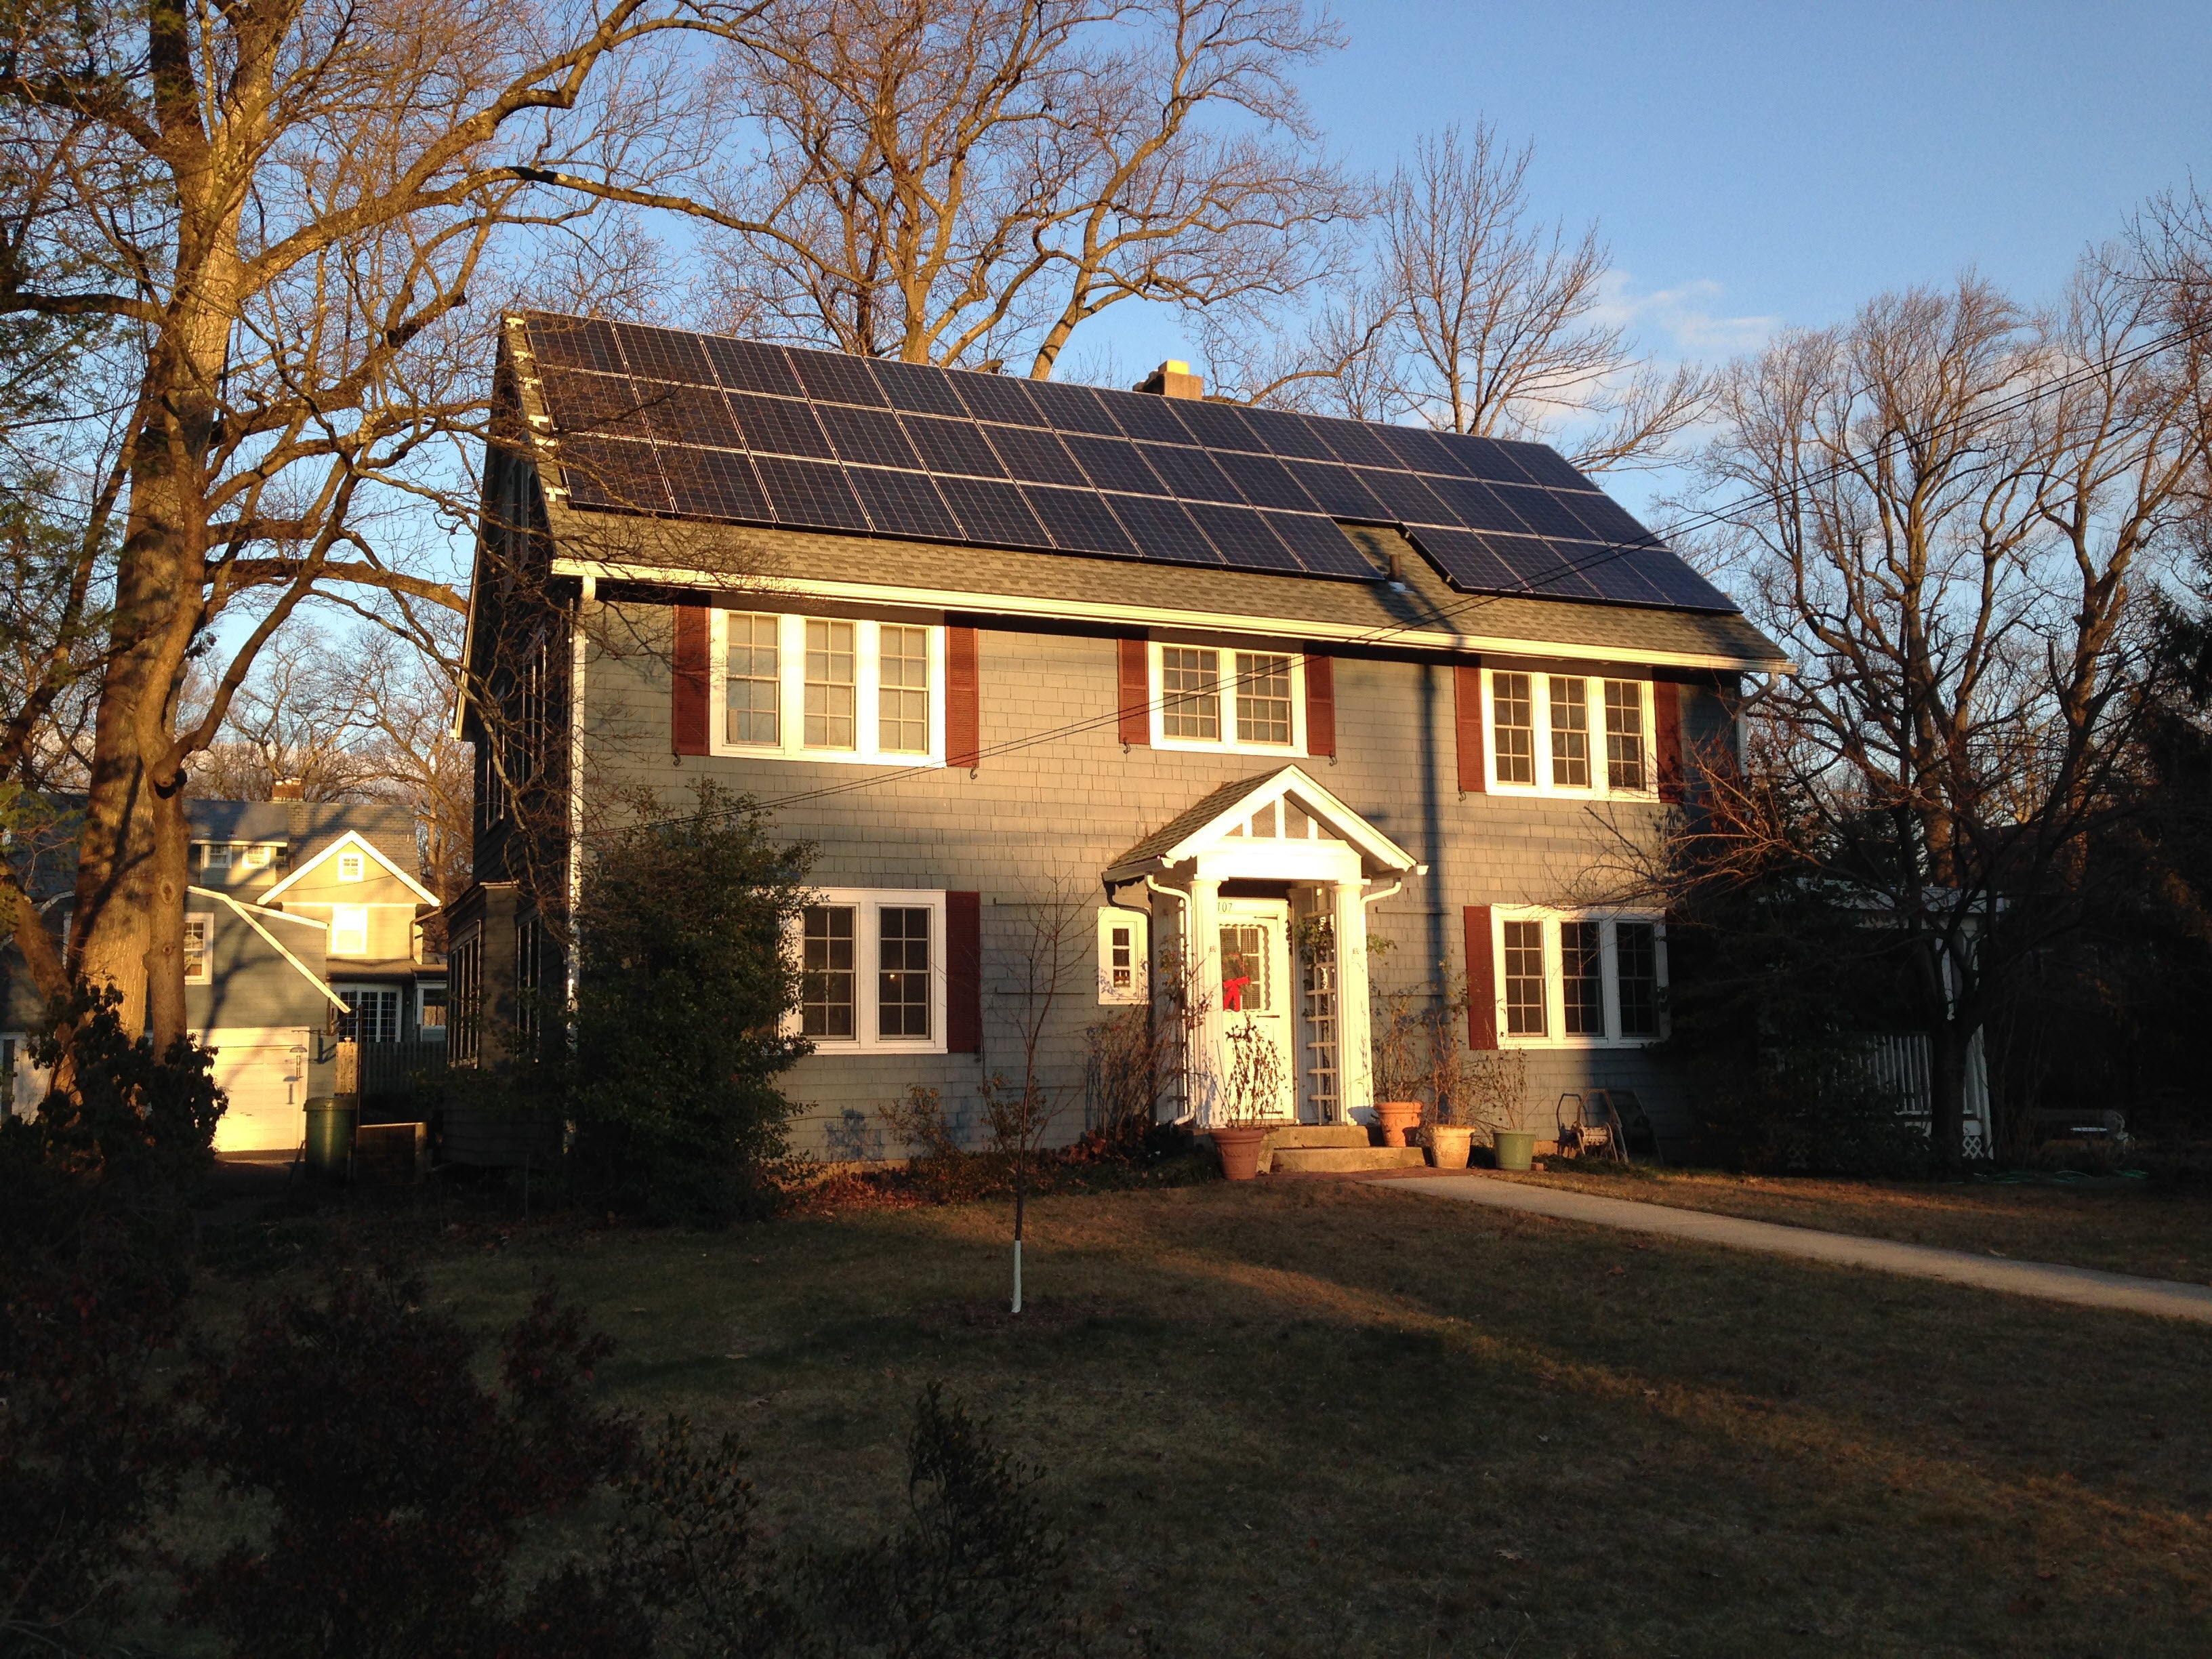 10.25 kW in Maplewood